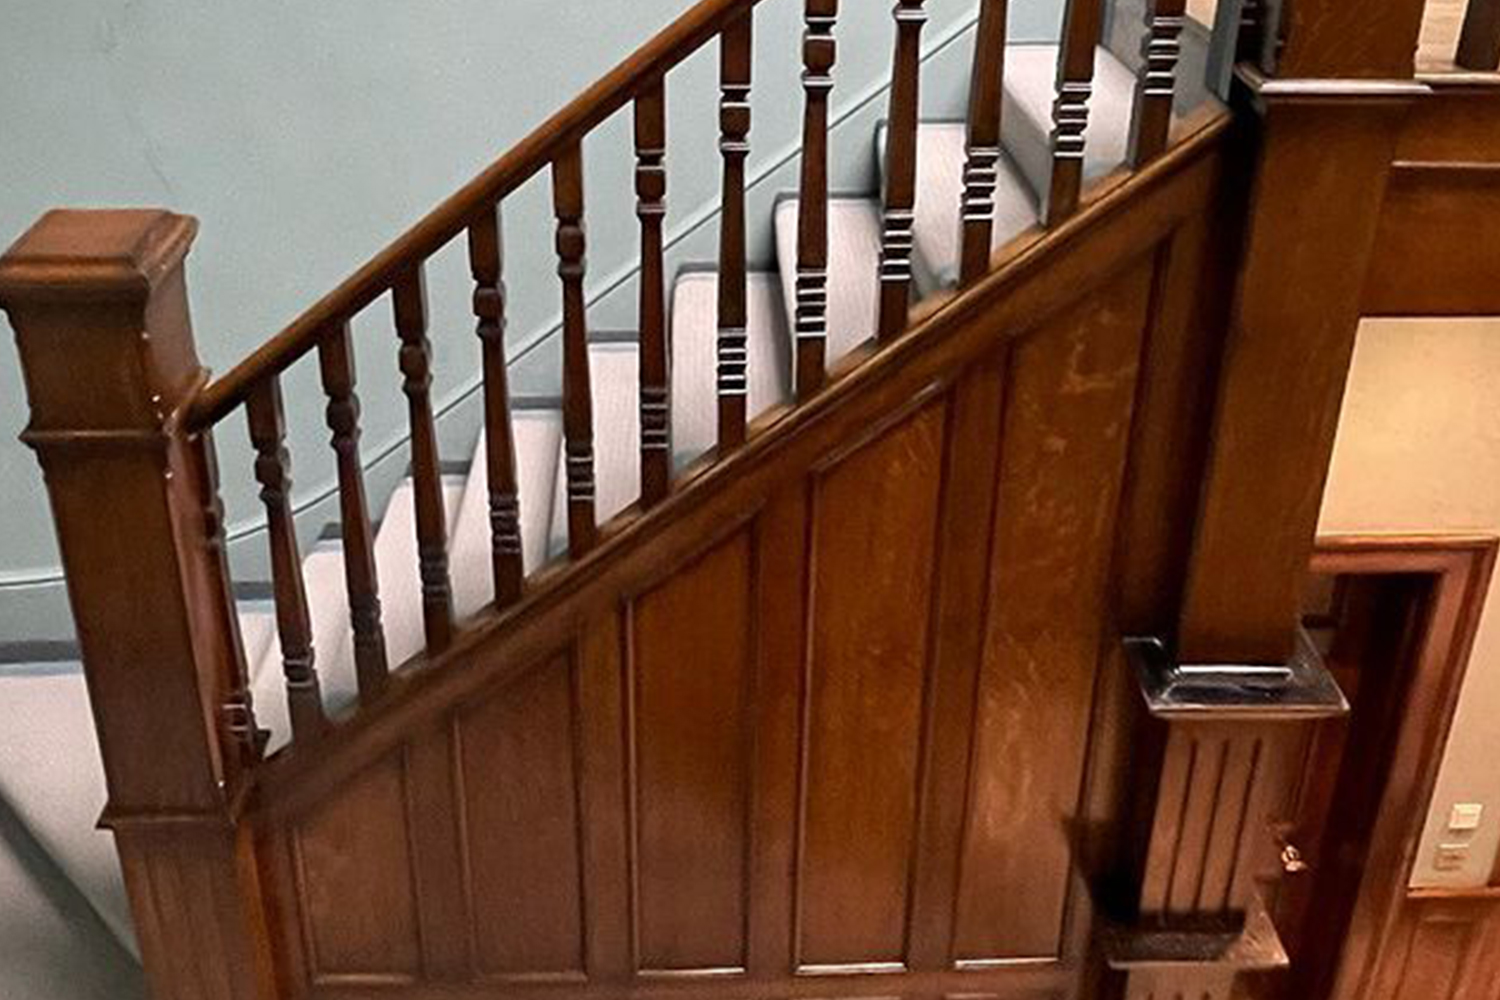 A handrail on a wooden staircase after polishing.